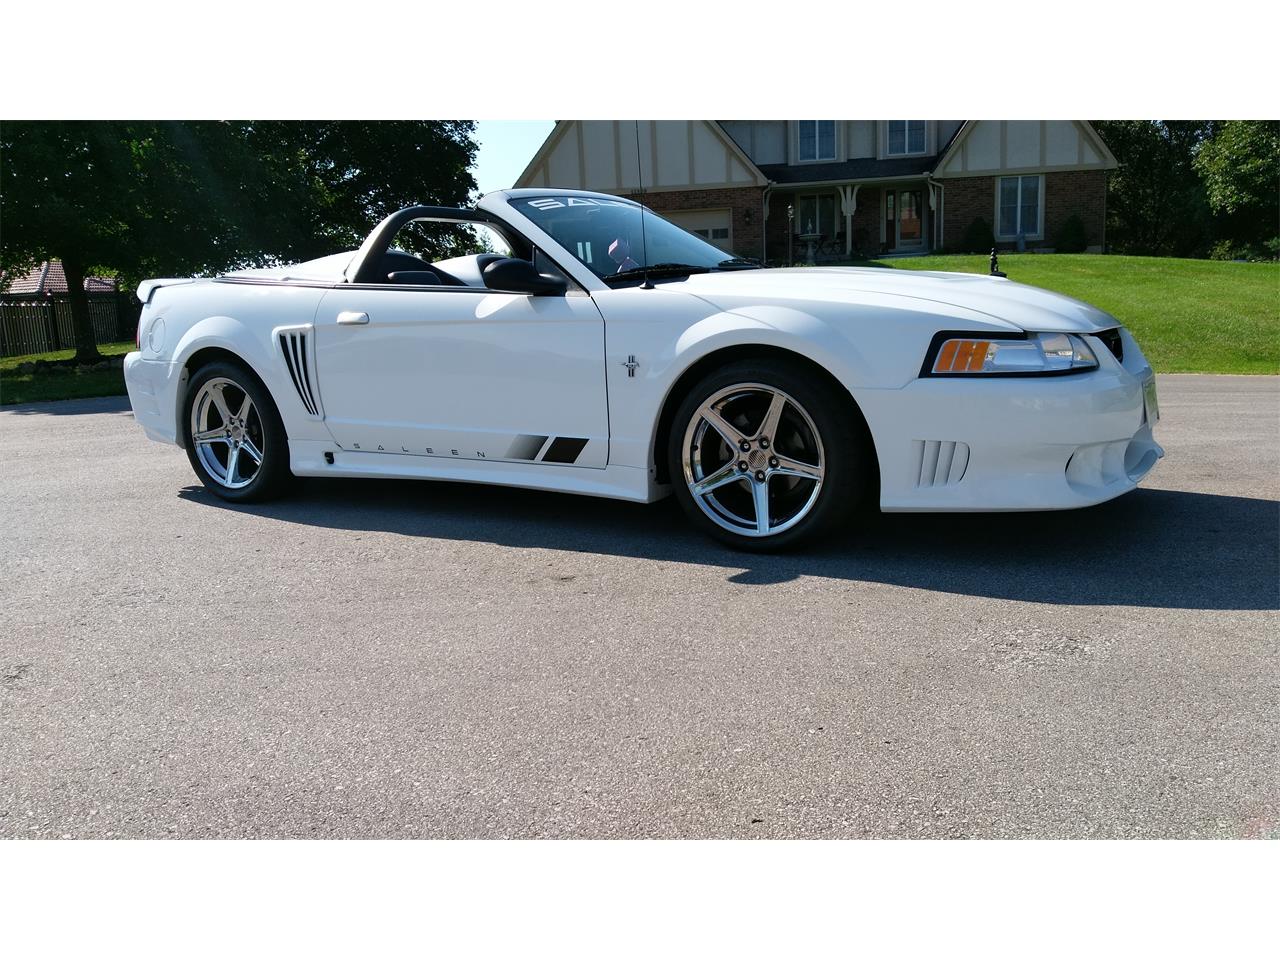 2000 Ford Mustang (Saleen) for sale in Parkville, MO – photo 2